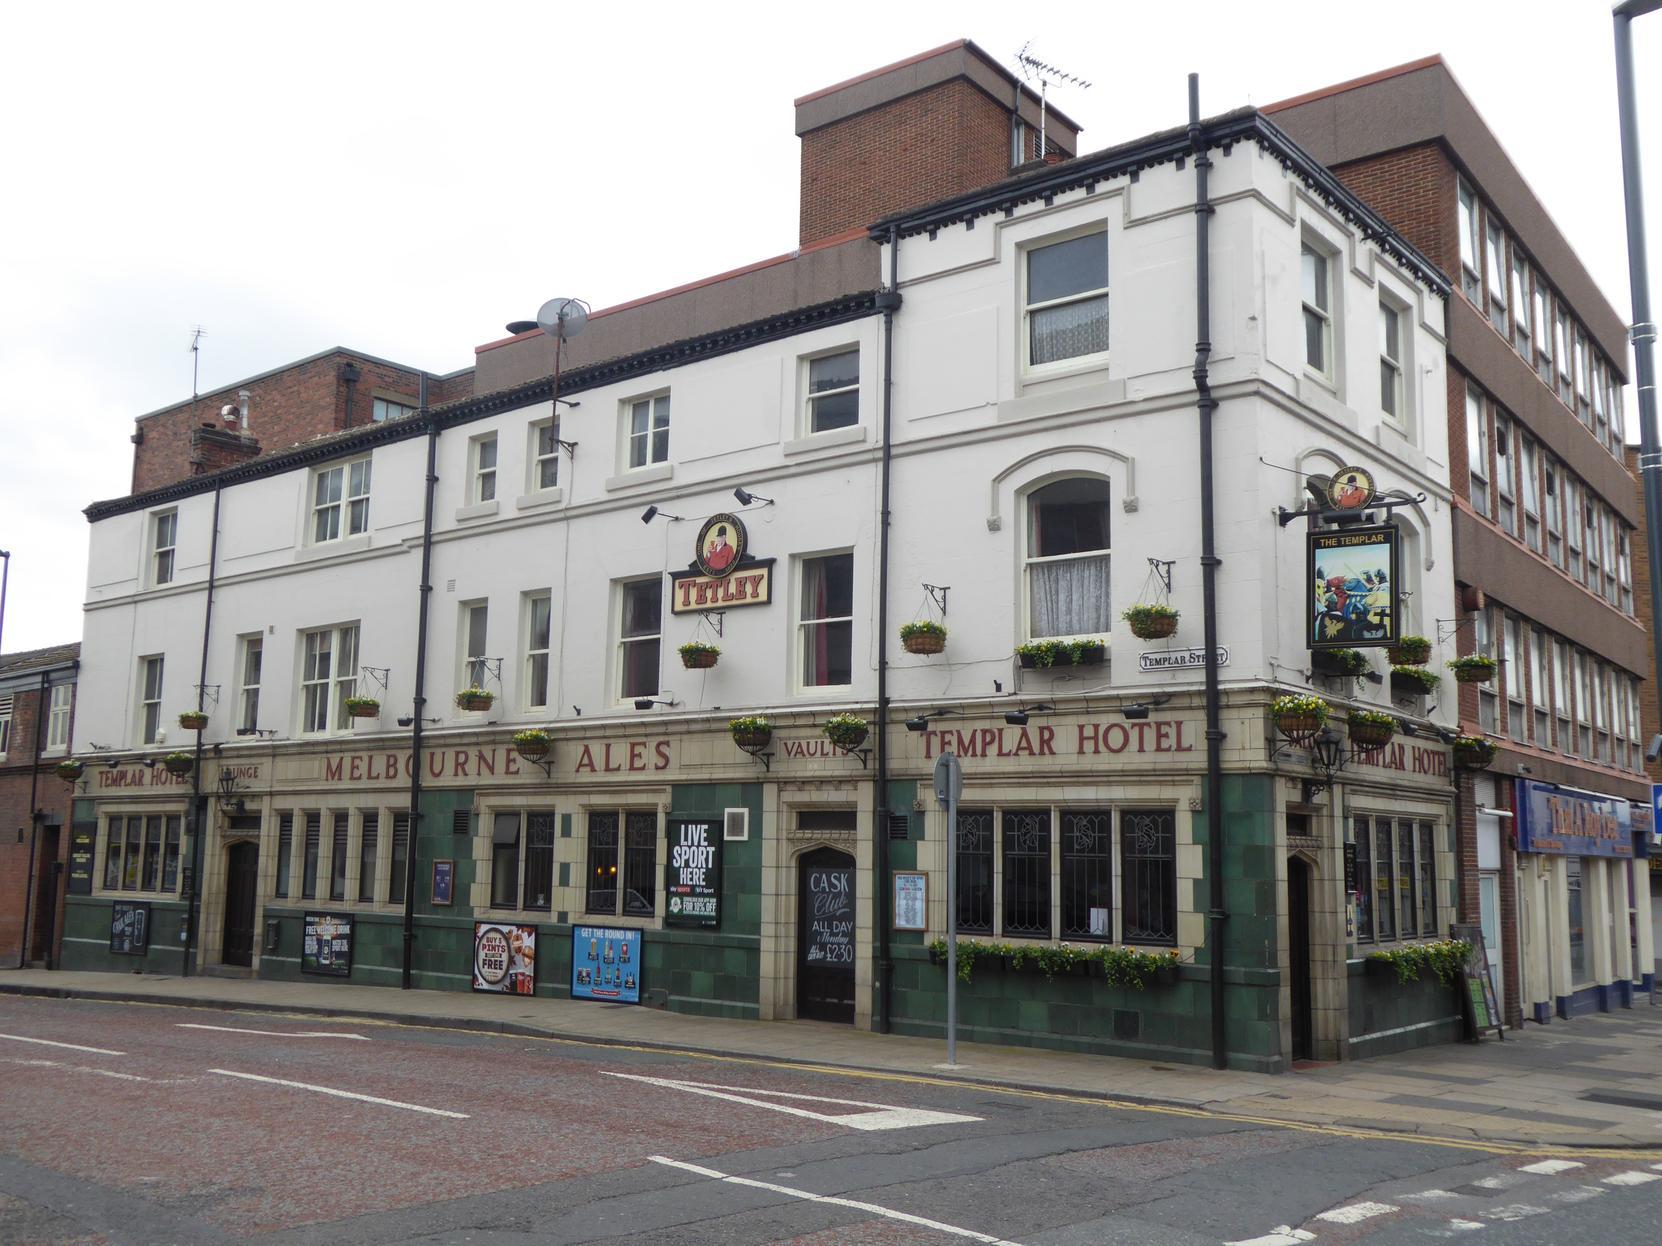 This street corner pub was built in the early 19th century. Was given a major refurbishment in the 1920s, much of which remains intact today. The outside  is clad with impressive green and cream tiling made by Burmantofts